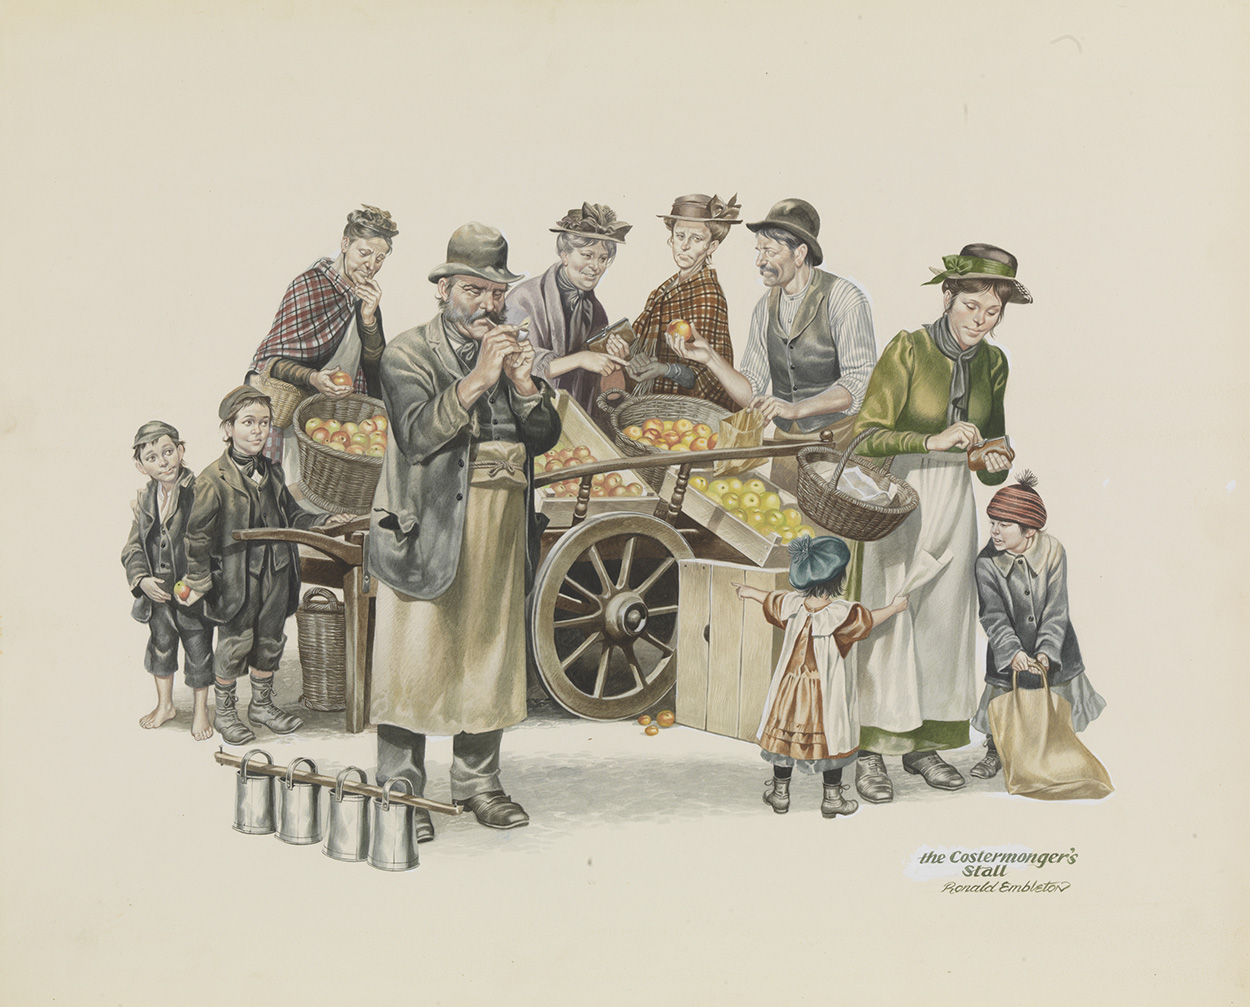 The Coster Mongers Stall (Original) (Signed) art by Victorian and Edwardian Britain (Ron Embleton) at The Illustration Art Gallery